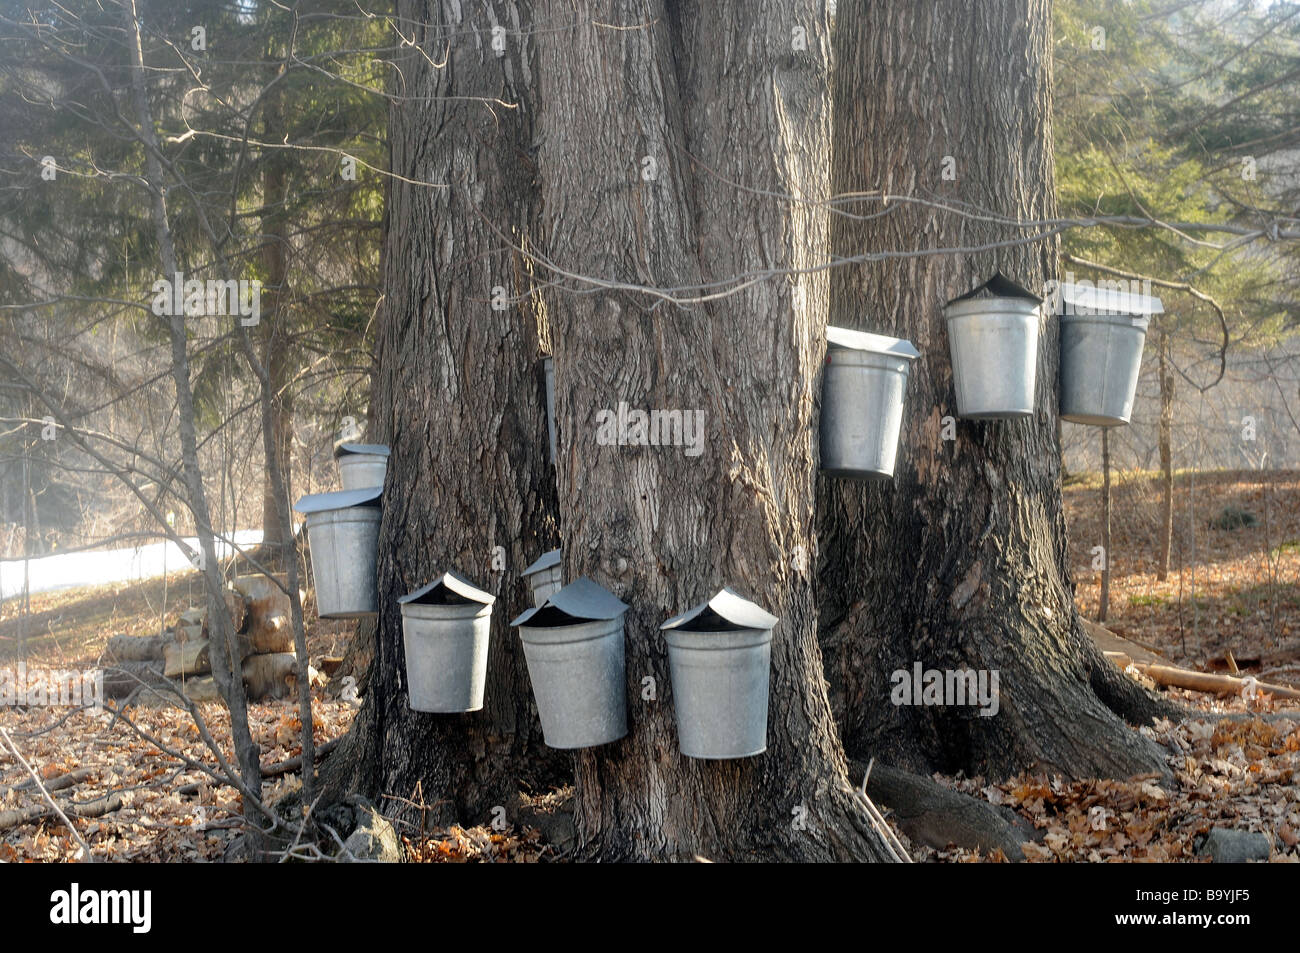 Buckets collecting sap for Maple syrup in Vermont Spring. Stock Photo